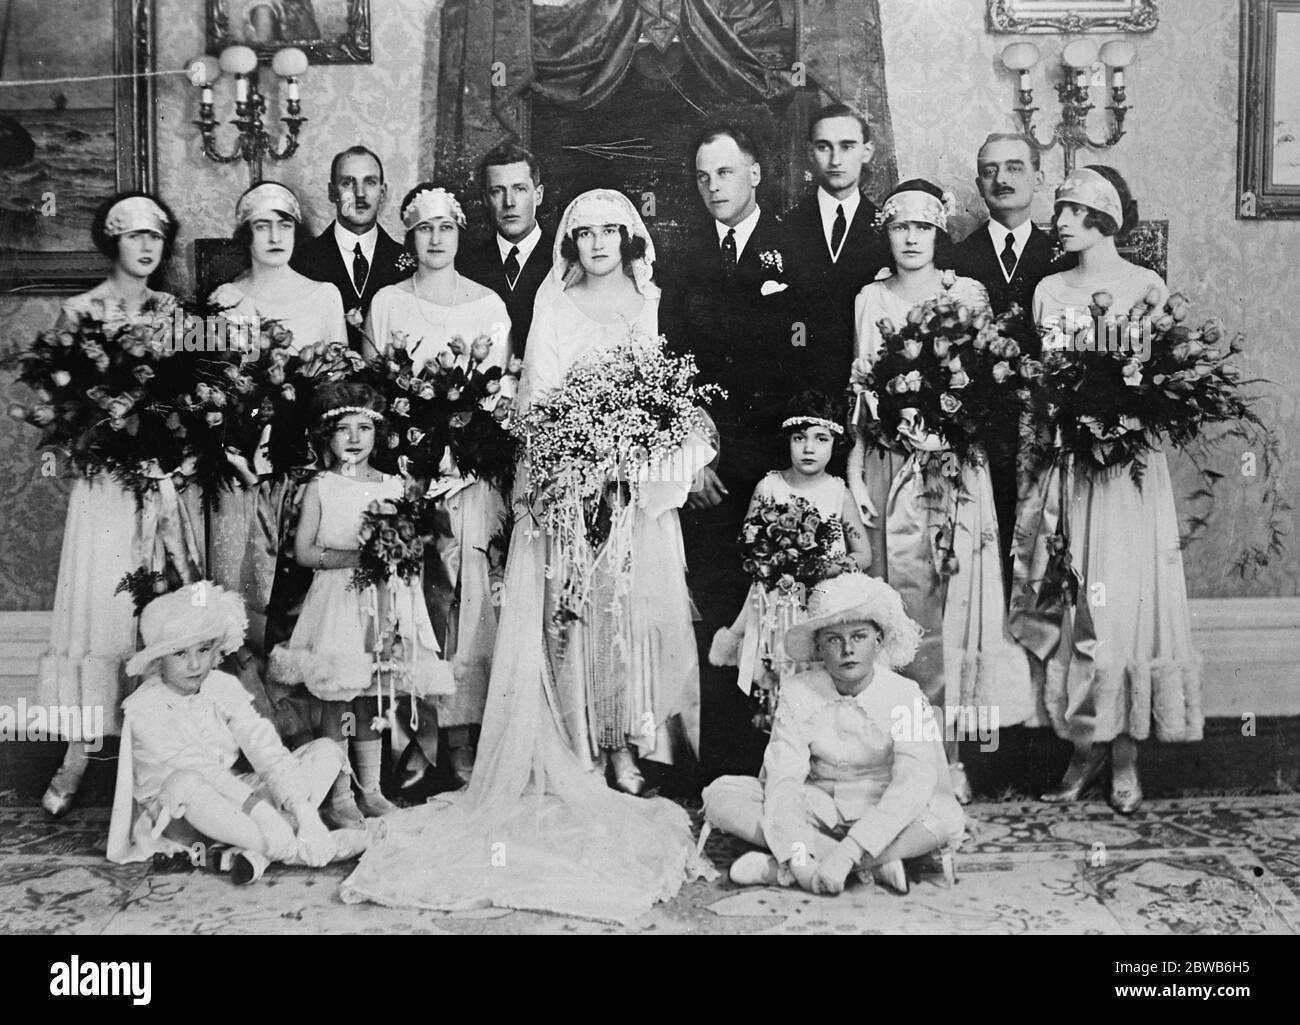 Canada ' s Royal Romance . The wedding took place at Ottawa , Canada , of Prince Erik of Denmark and Miss Lois Booth . The wedding group , back row , left to right ; Miss Betty Henderson , Lady Elizabeth Byng , Prince Viggo , Mrs W D Herridge , C O Fellowes , M C the bride , the groom , Count Leon de Moultke Huntfeldt , Miss Marjorie Cook , Count de Roussy de Sales , Lady Mary Byng . Flower girls on either side of the bride are , left to right , Miss Cynthia Davies and Miss Lilias Ahearn The pages sitting left to right ; Master Rowley Booth and Master John Bassett . 23 February 1924 Stock Photo